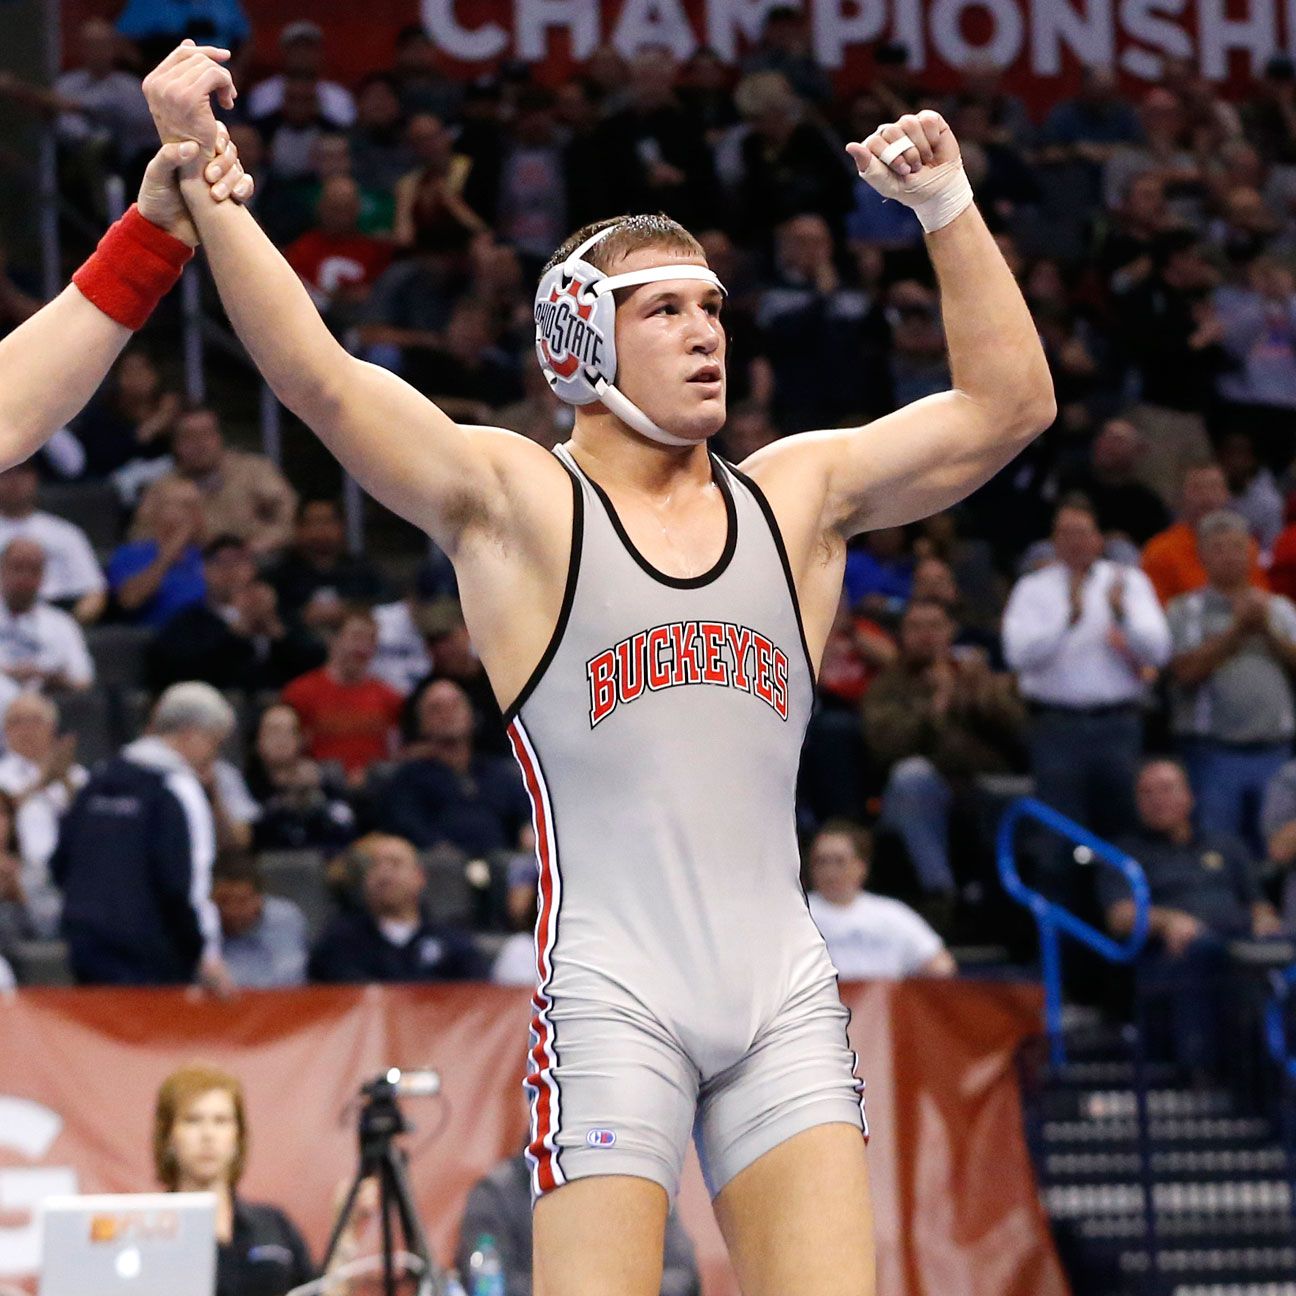 Ohio State wrestler Logan Stieber shoots for fourth title with help ...